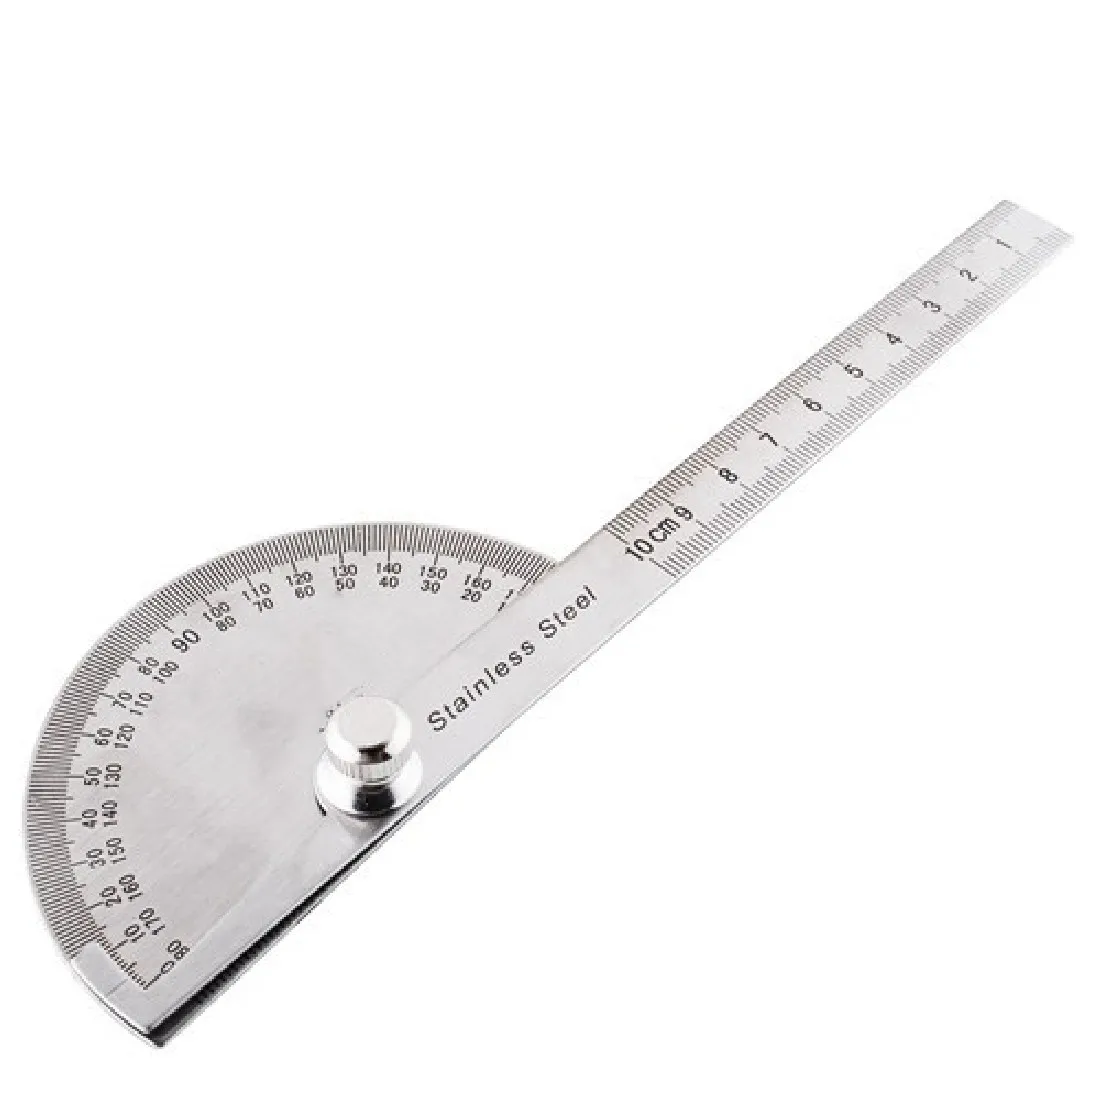 Angle ruler protractor stainless steel ruler 180°  square woodworking tool UQ 